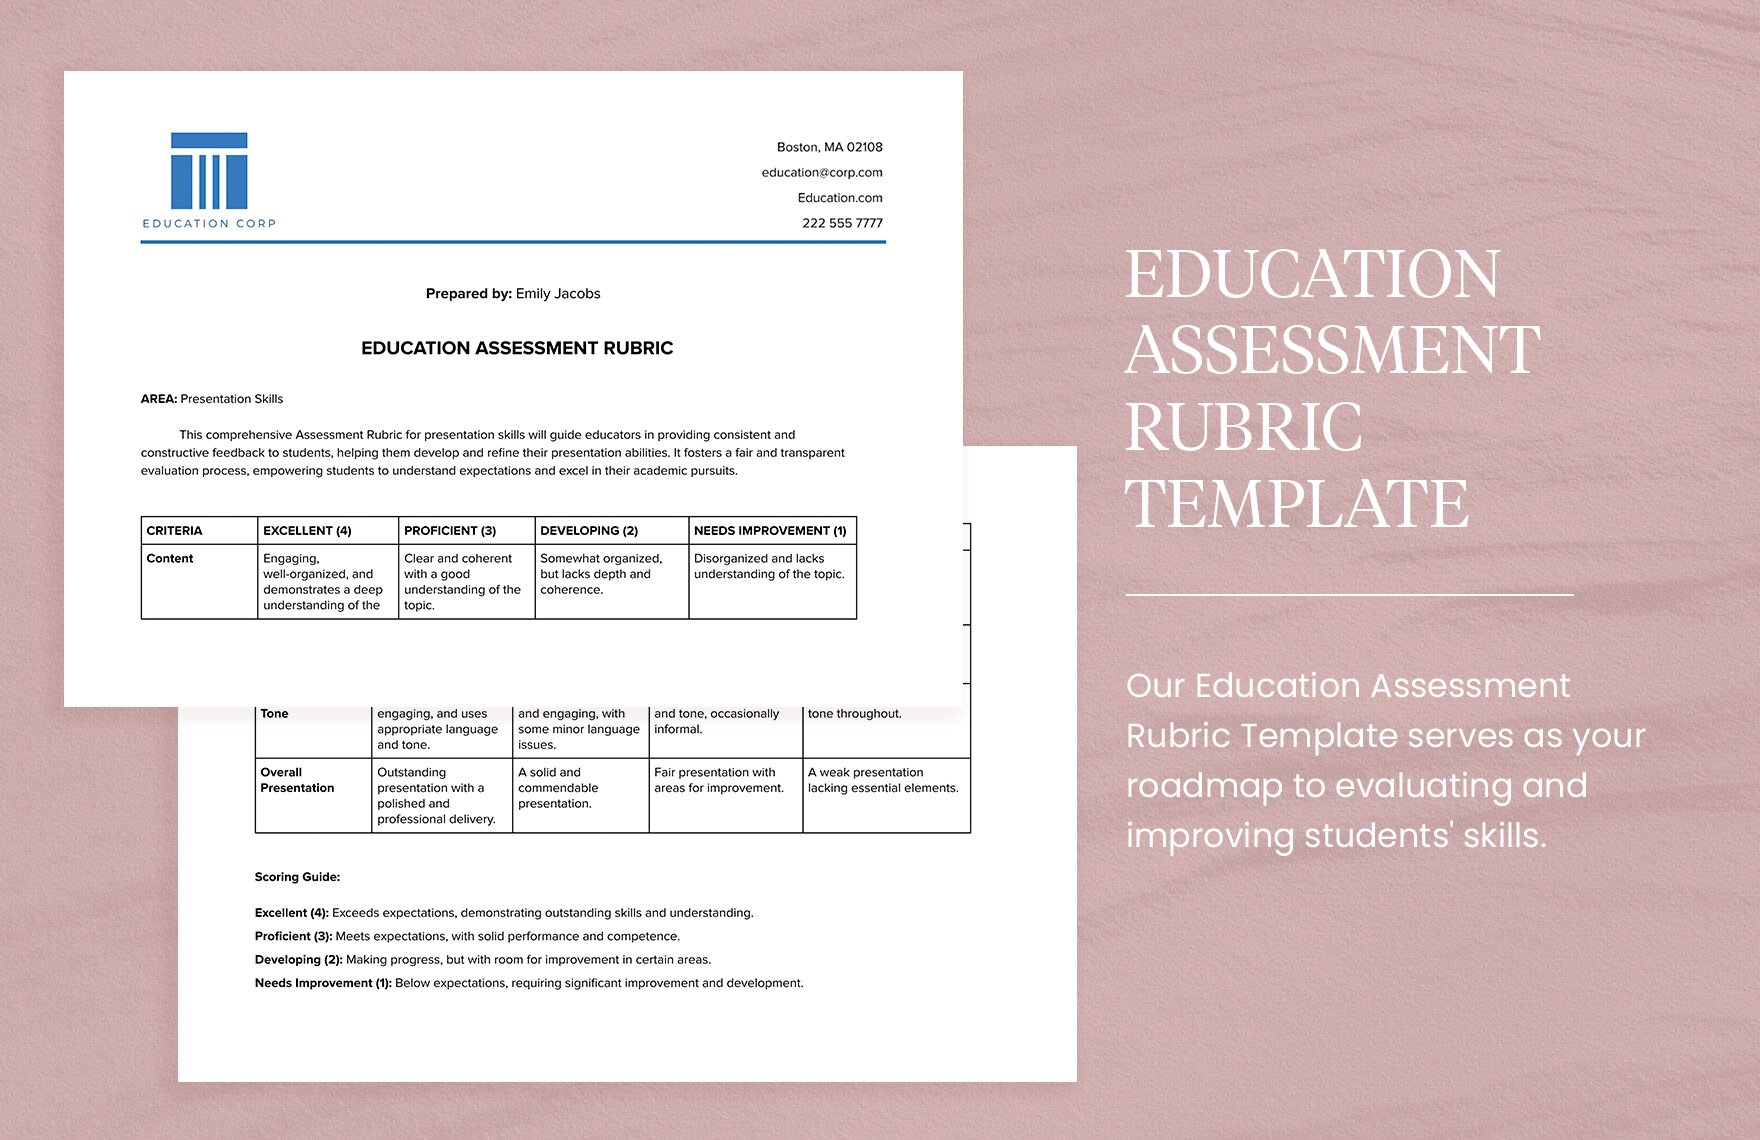 Education Assessment Rubric Template in Word, Google Docs, PDF